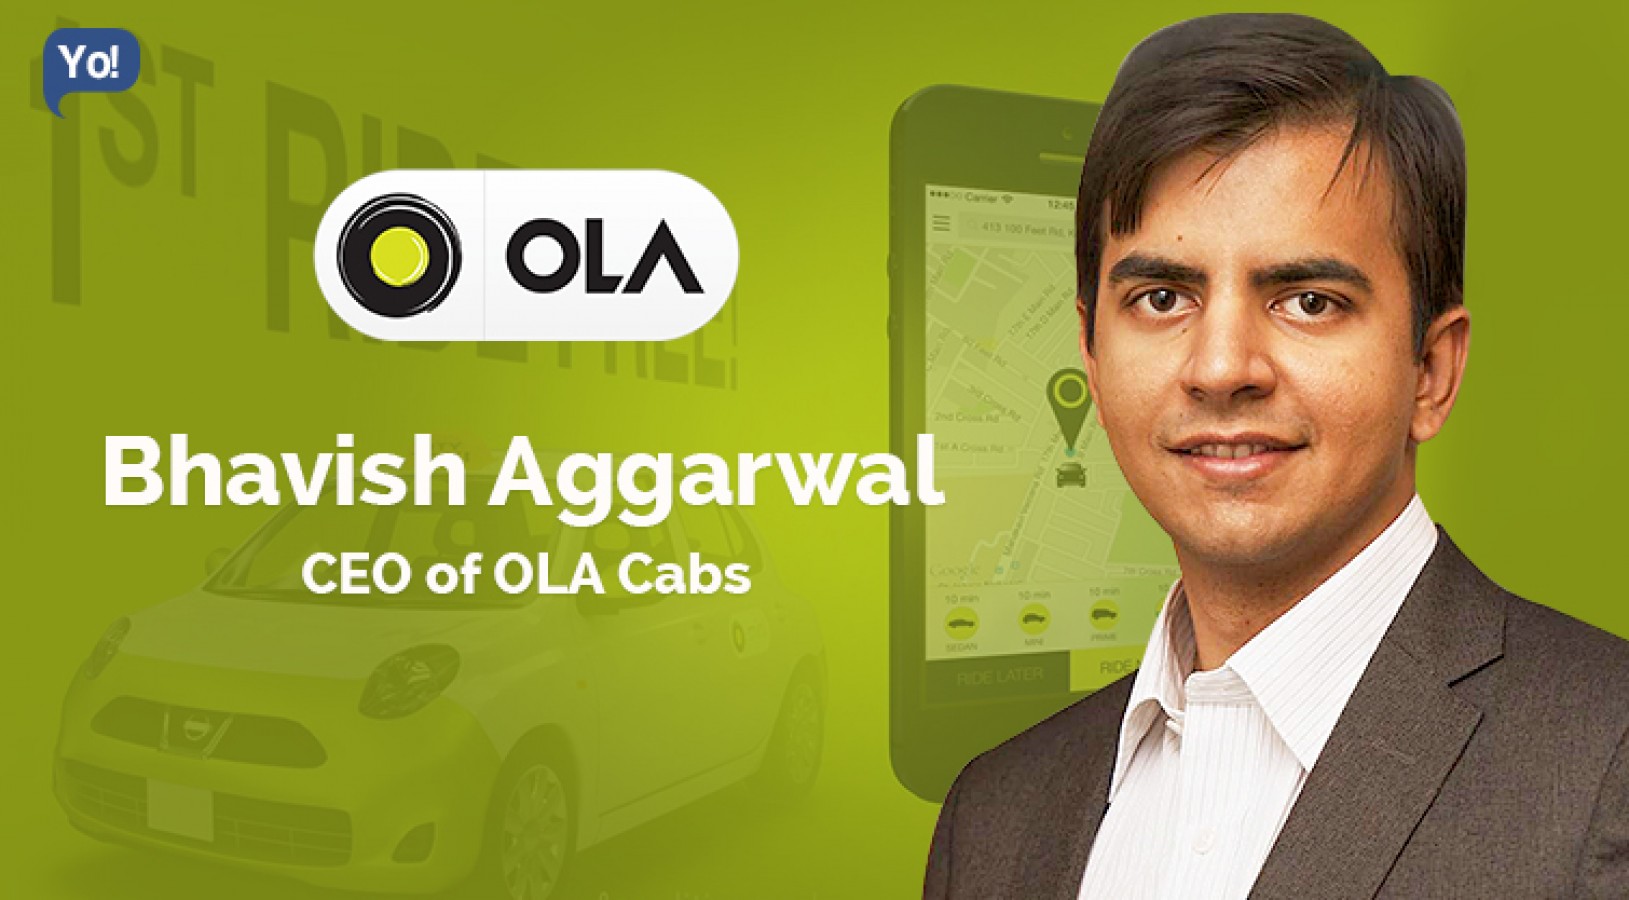 ceo bhavish aggarwal hints about an ola electric car, soon to launch in india | newstrack english 1